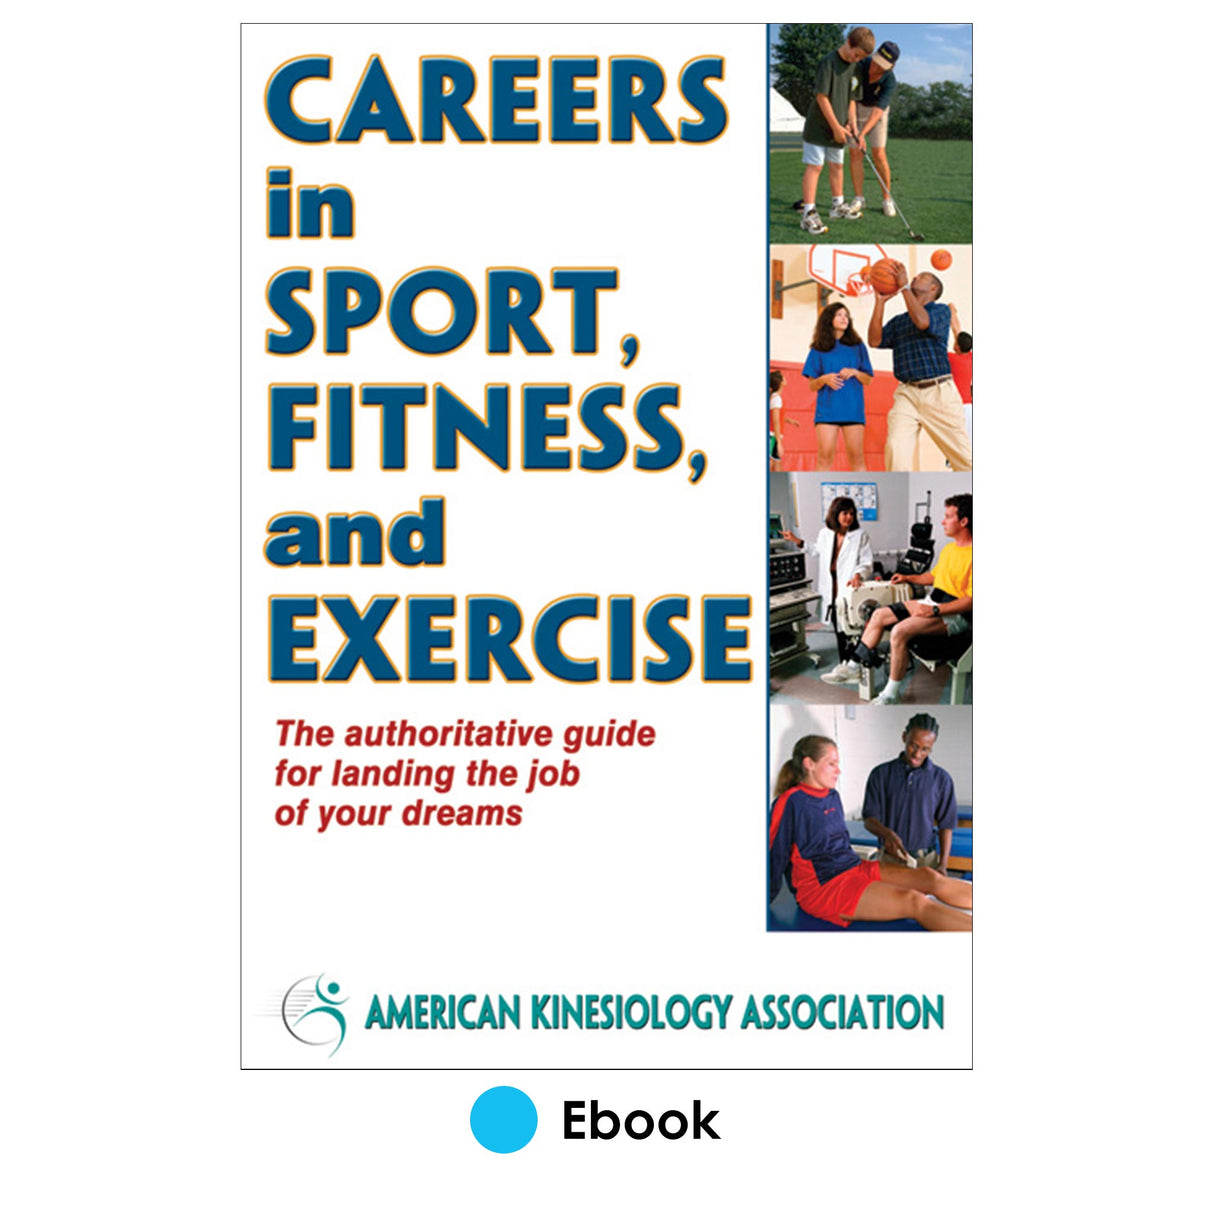 Careers in Sport, Fitness, and Exercise PDF